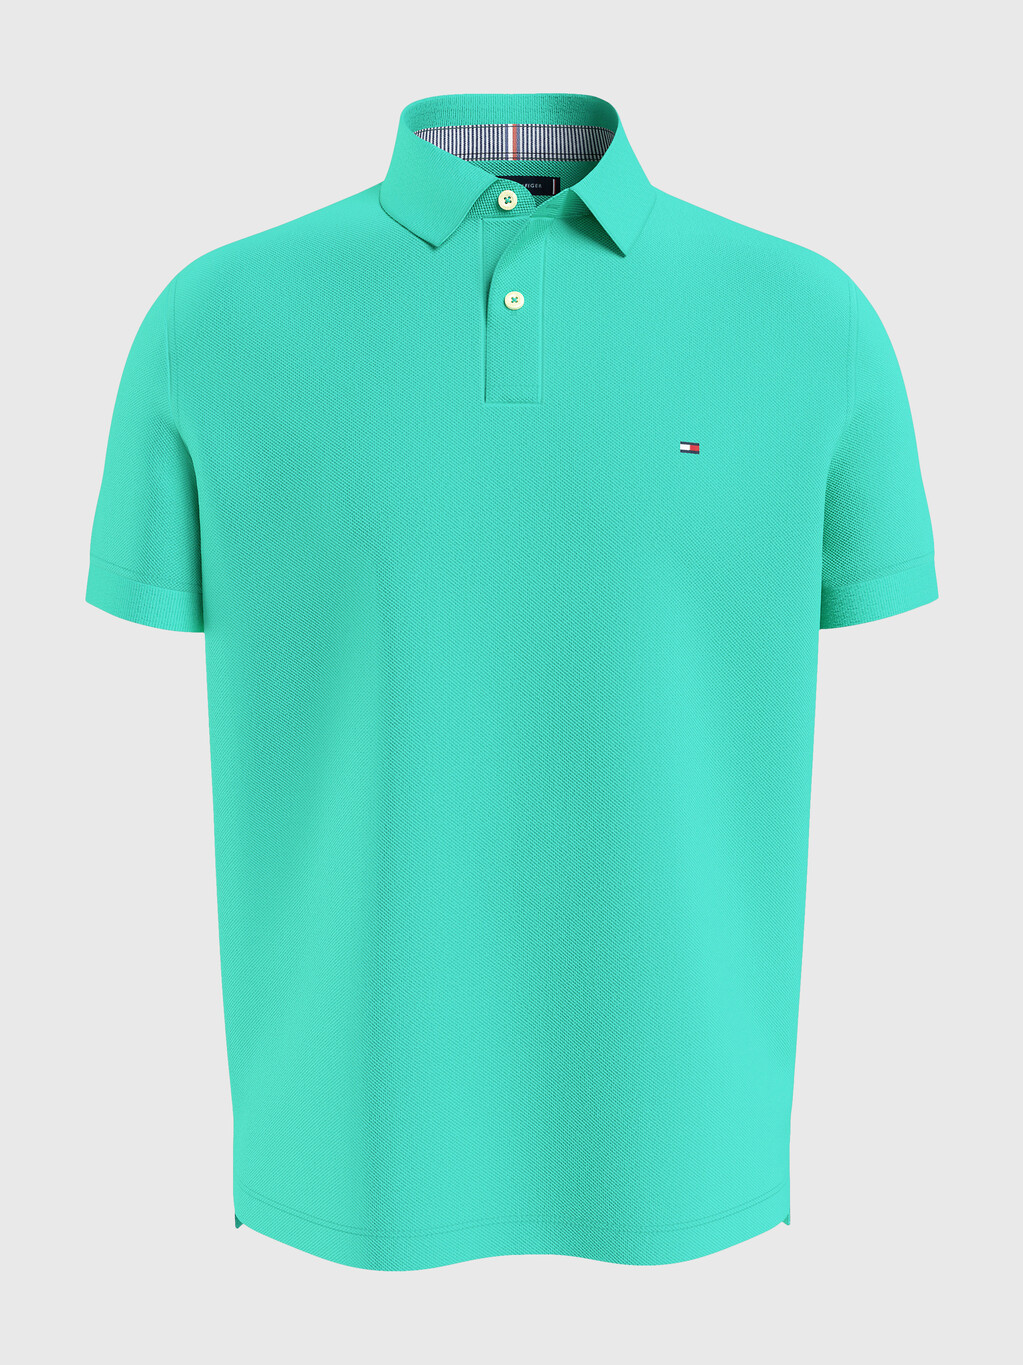 Buy 1985 ORGANIC COTTON REGULAR FIT POLO in color ALOHA GREEN